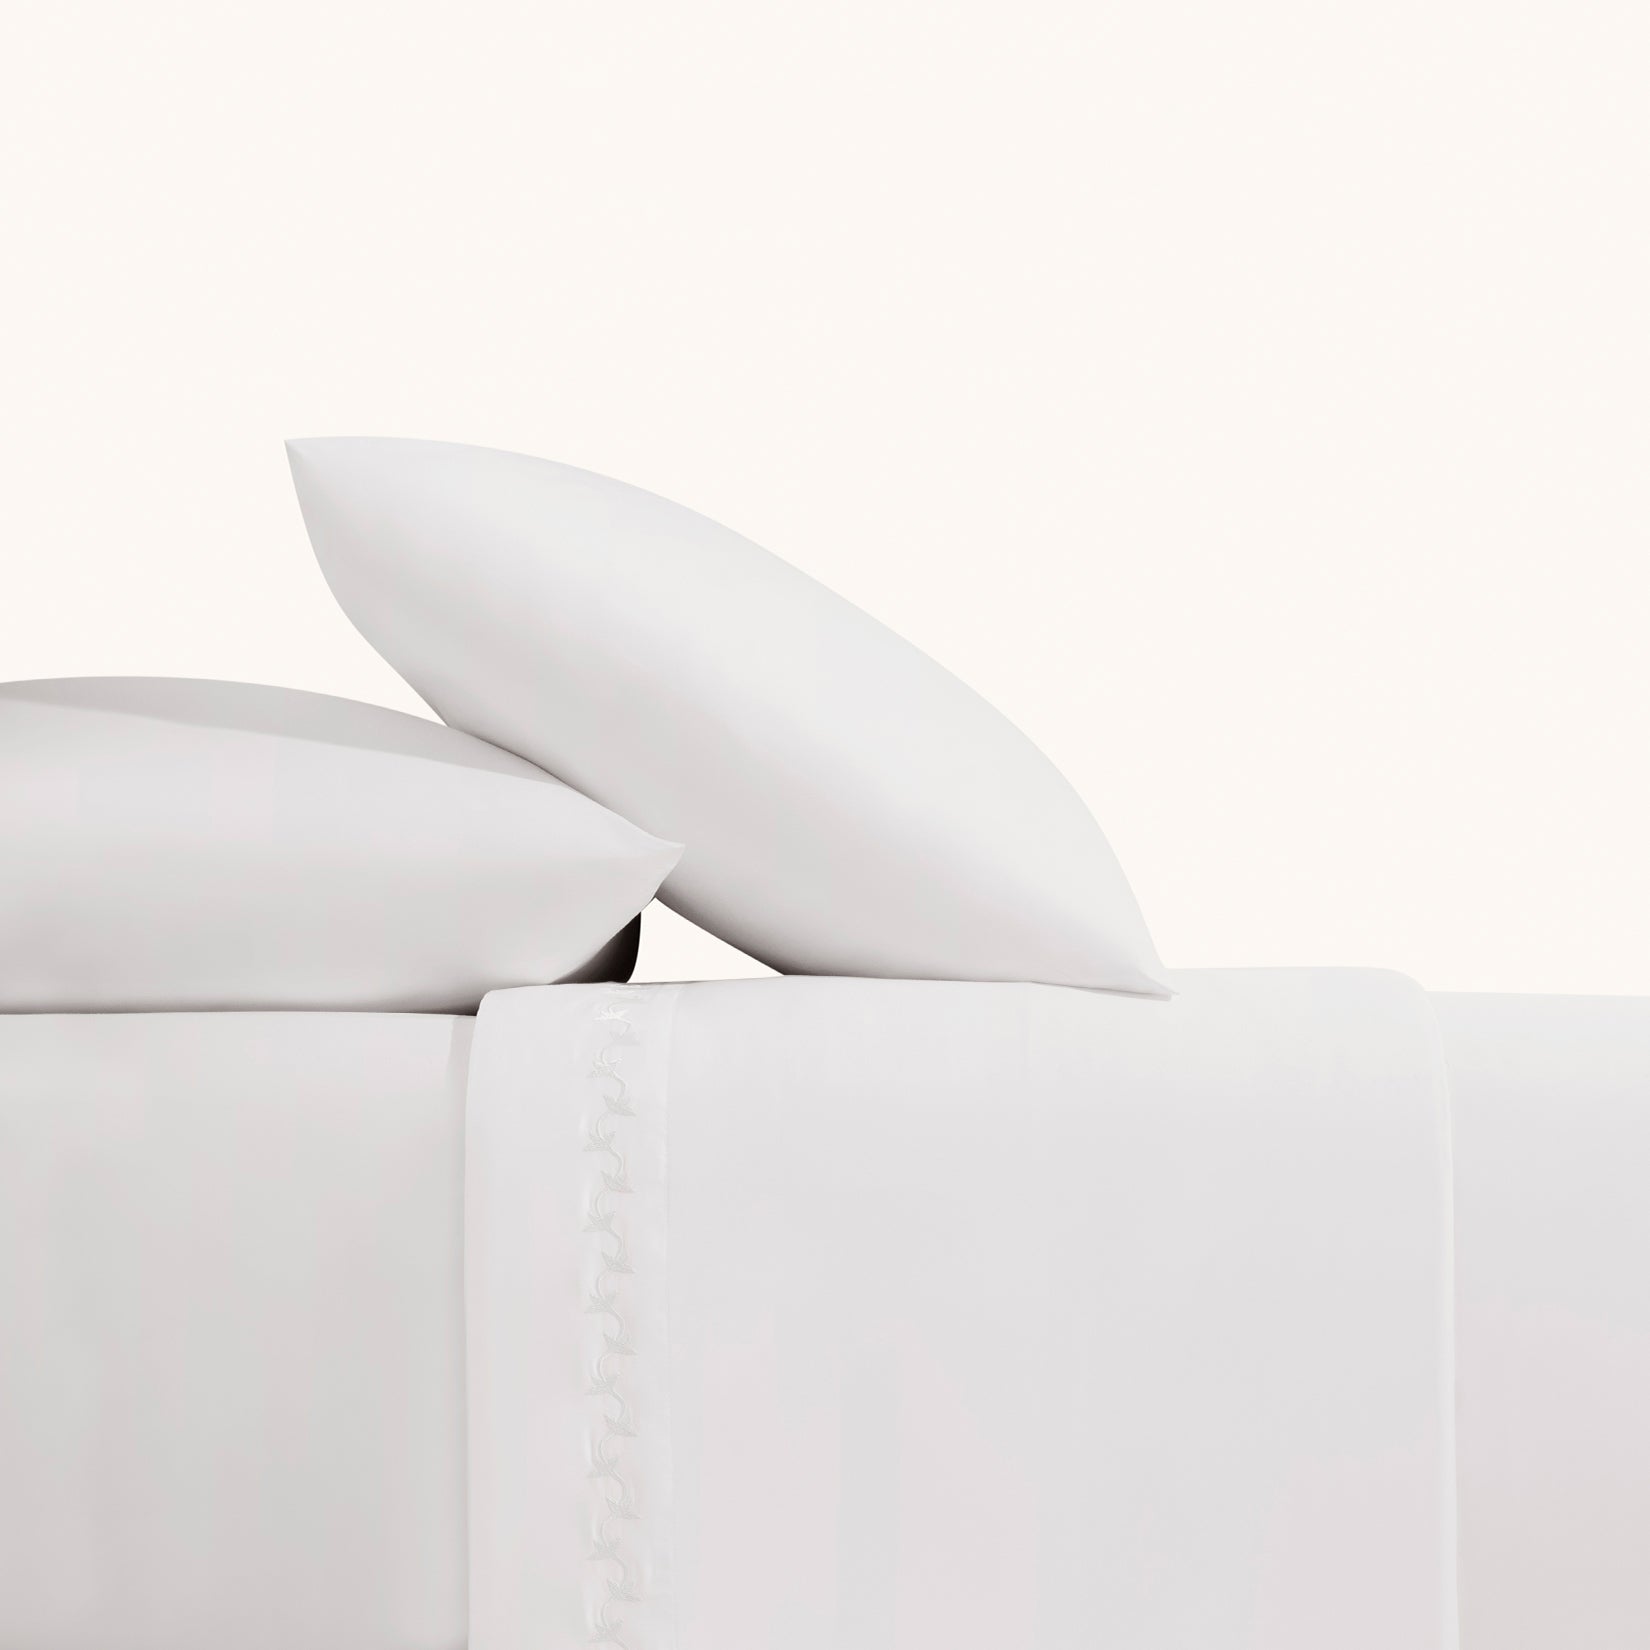 Nina Classic White 600 thread count sheet set. White embroidered pillows and white embroidered sheets with on bed from side view.